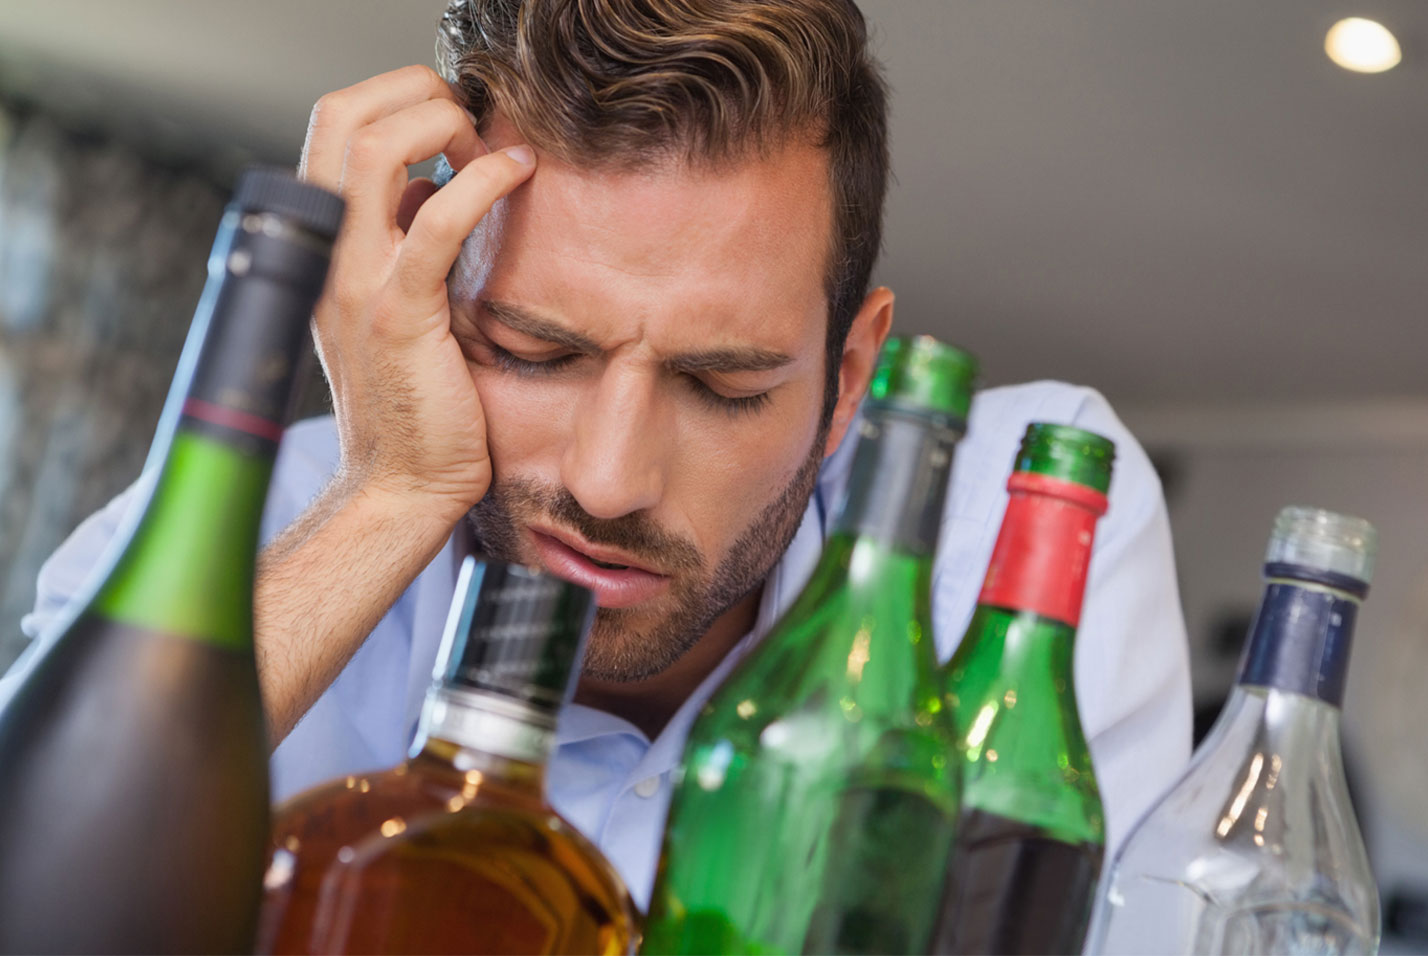 Hangovers can cost more than just your bar tab